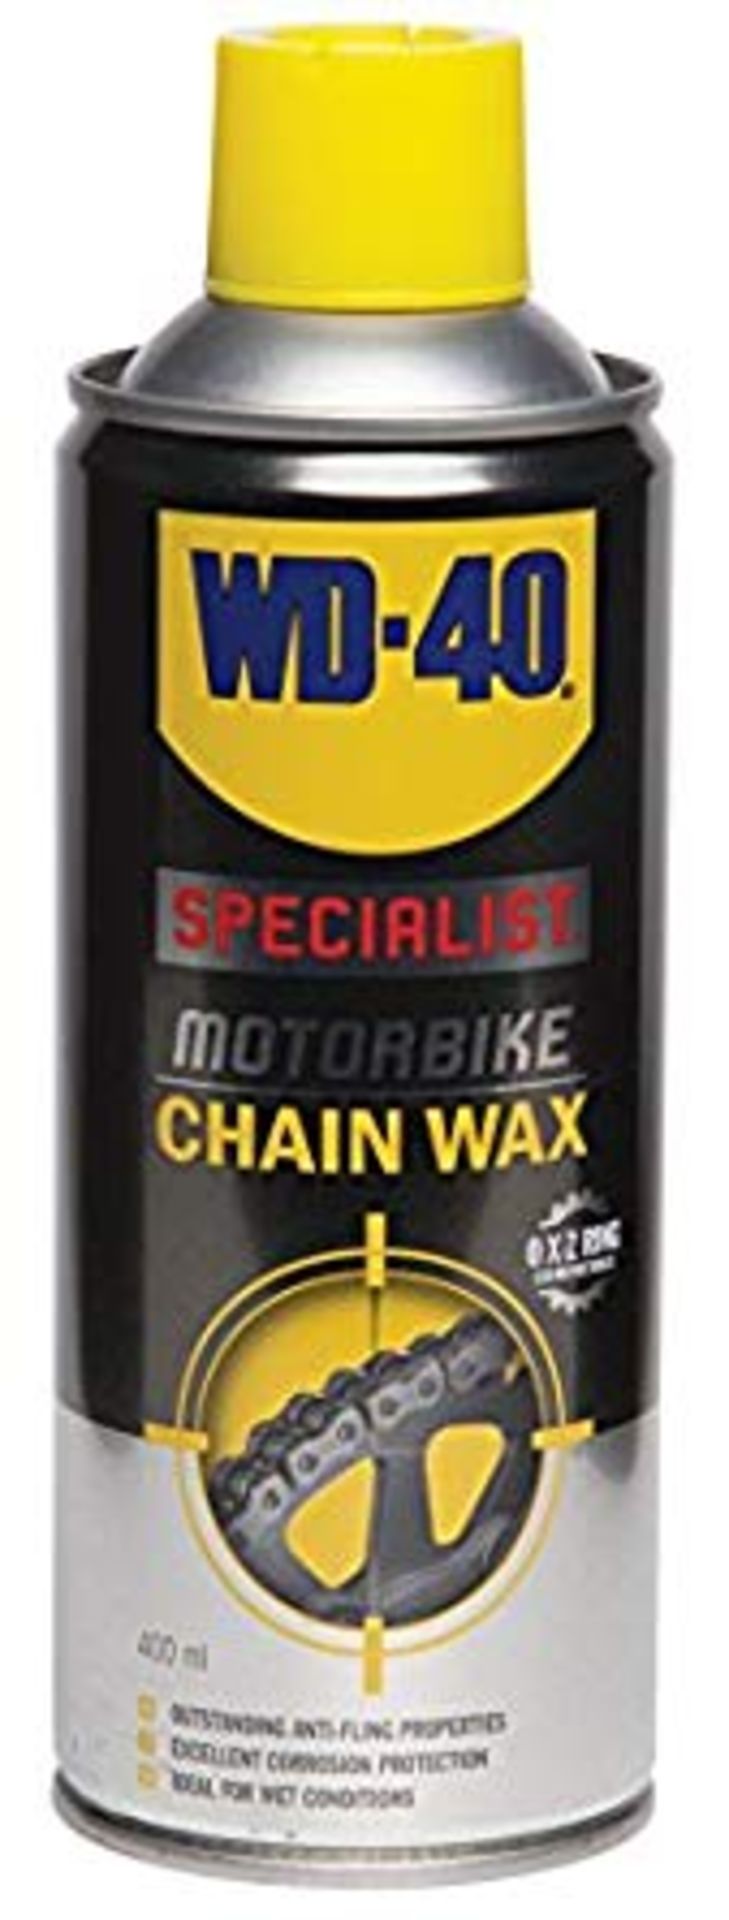 6pcs Brand new WD40 as pictured 200ml 6pcs Brand new WD40 as pictured 200ml - brand new sealed